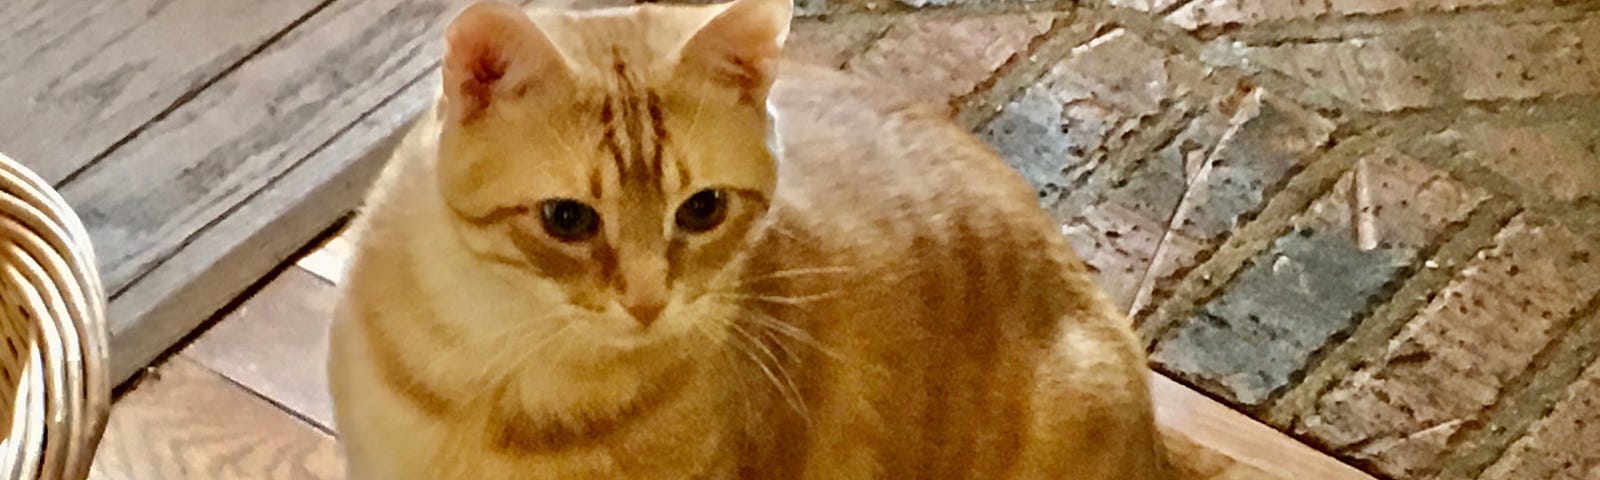 Author’s photo of Bernie cat — a yellow tabby who is sitting on the hardwood floor